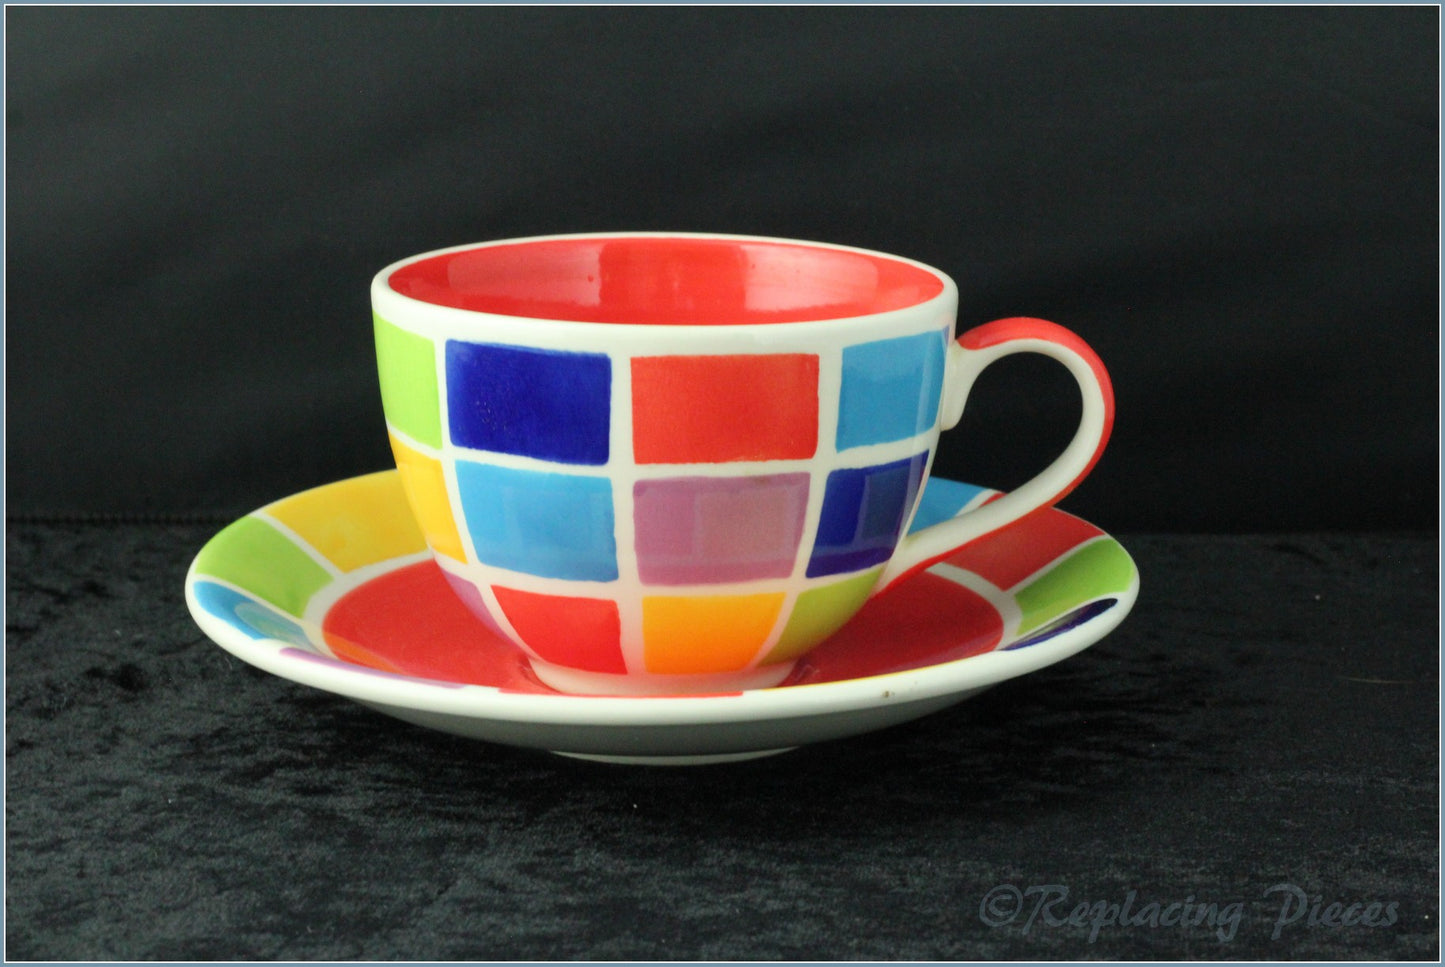 RPW6 - Whittards - Coloured Squares Teacup & Saucer